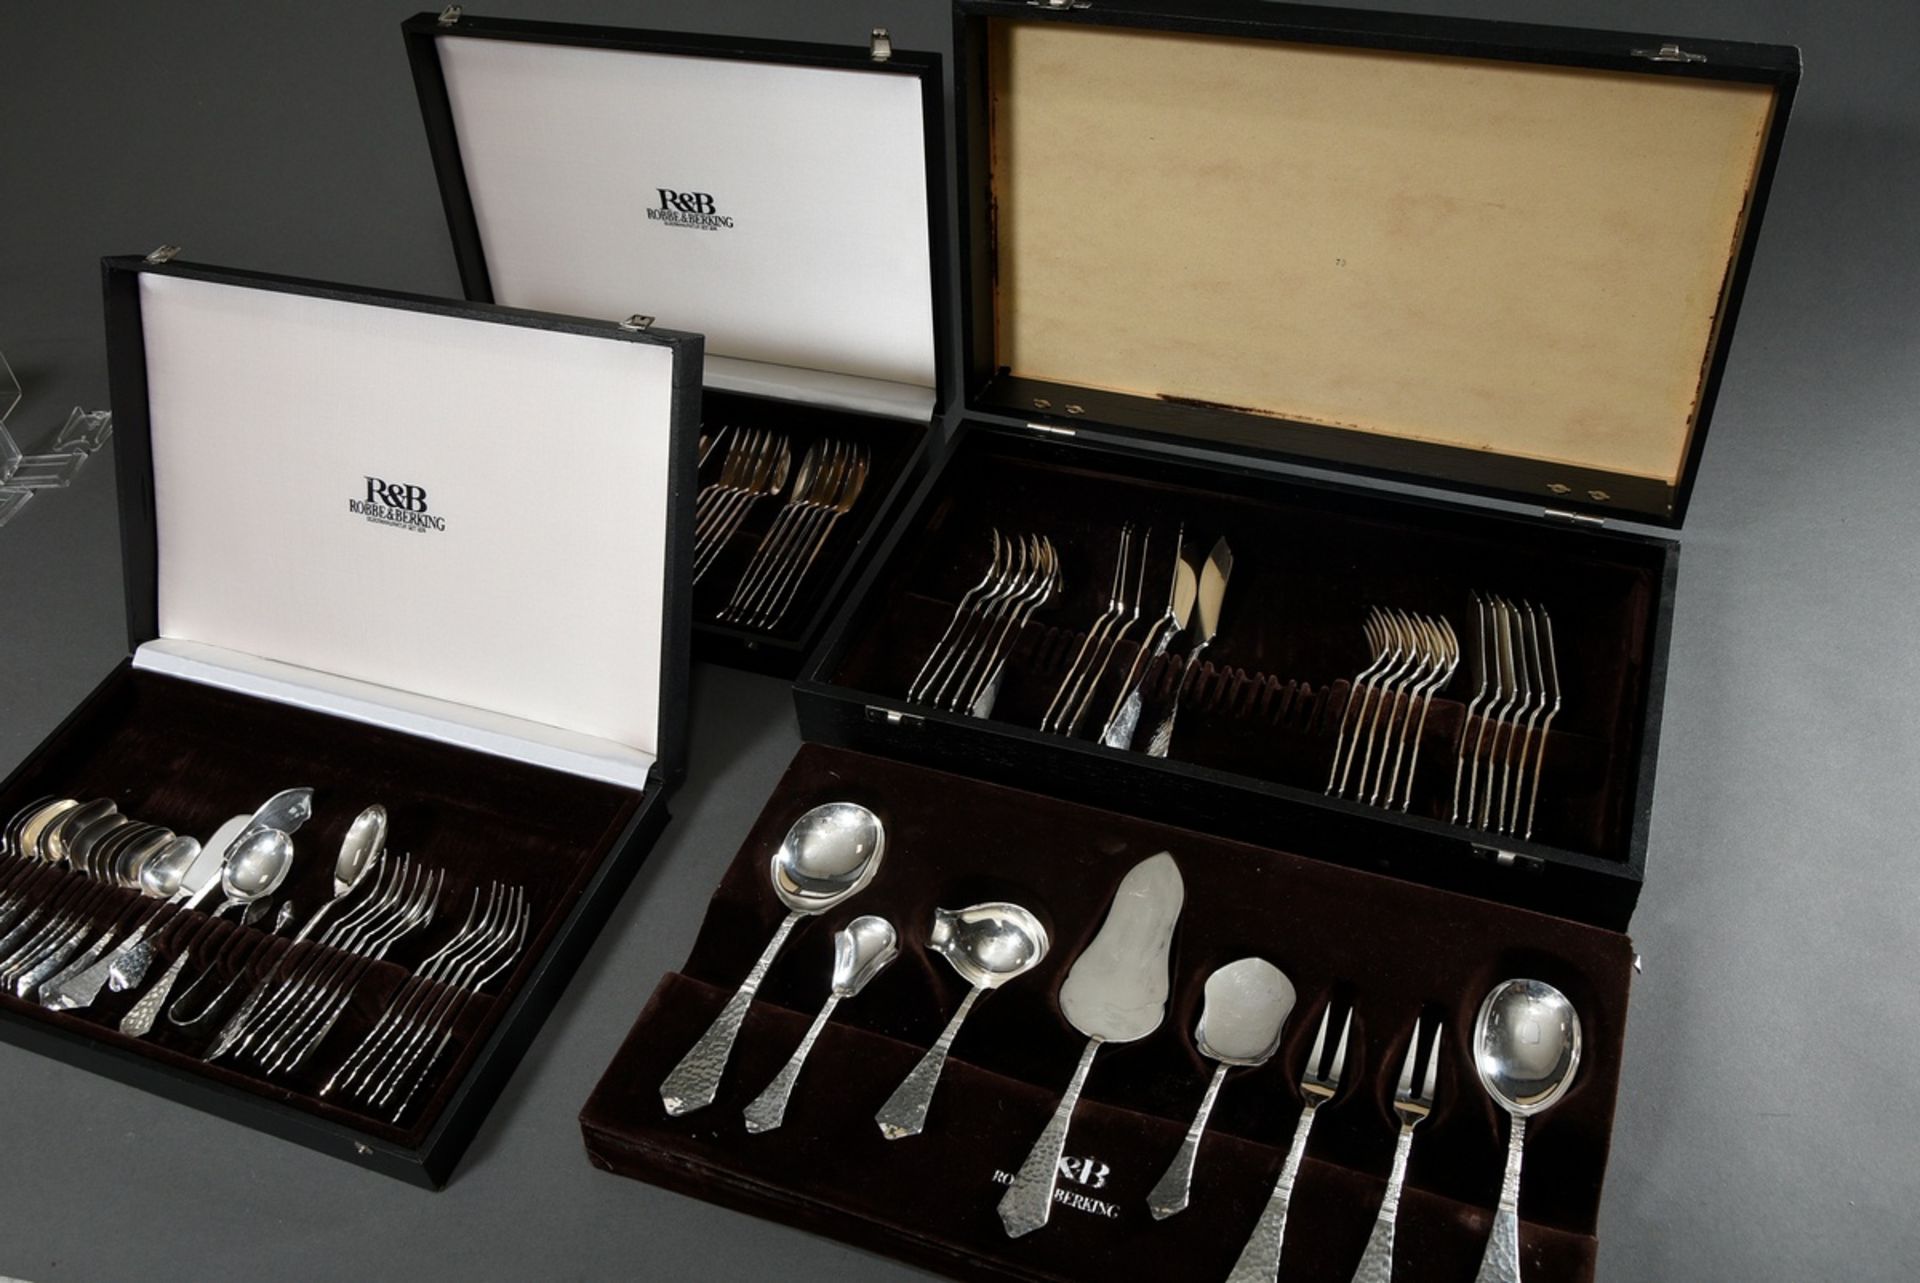 97 Pieces Robbe & Berking cutlery "Hermitage" with marbled and floral engraved handles for 12 perso - Image 8 of 12